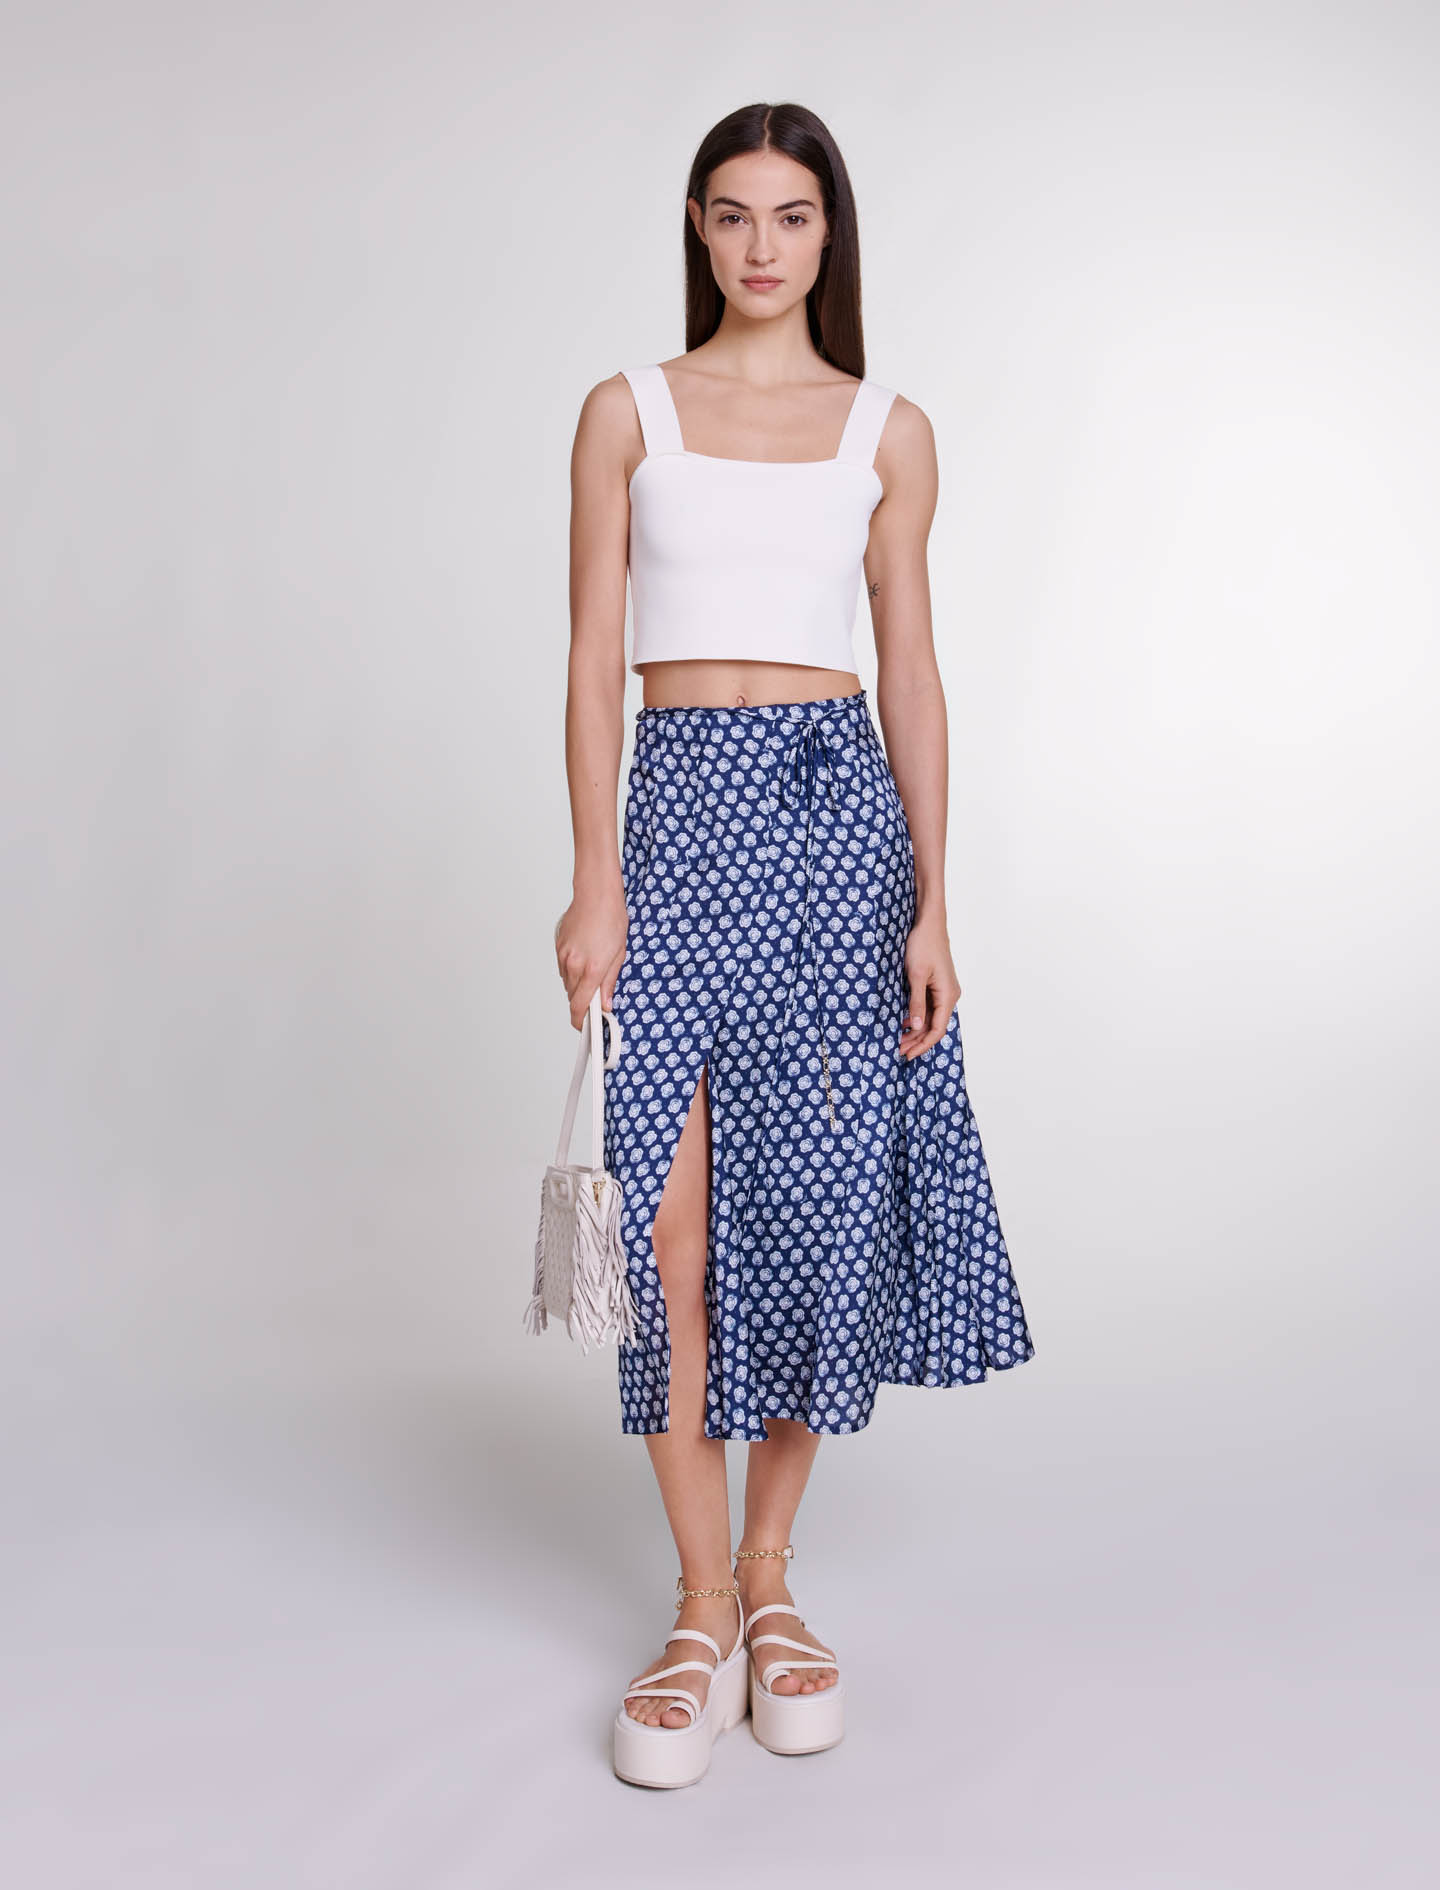 Mixte's viscose Chain: Mid-length satin-effect skirt, size Mixte-Skirts & Shorts-US XL / FR 41, in color Clover navy/ecru print /